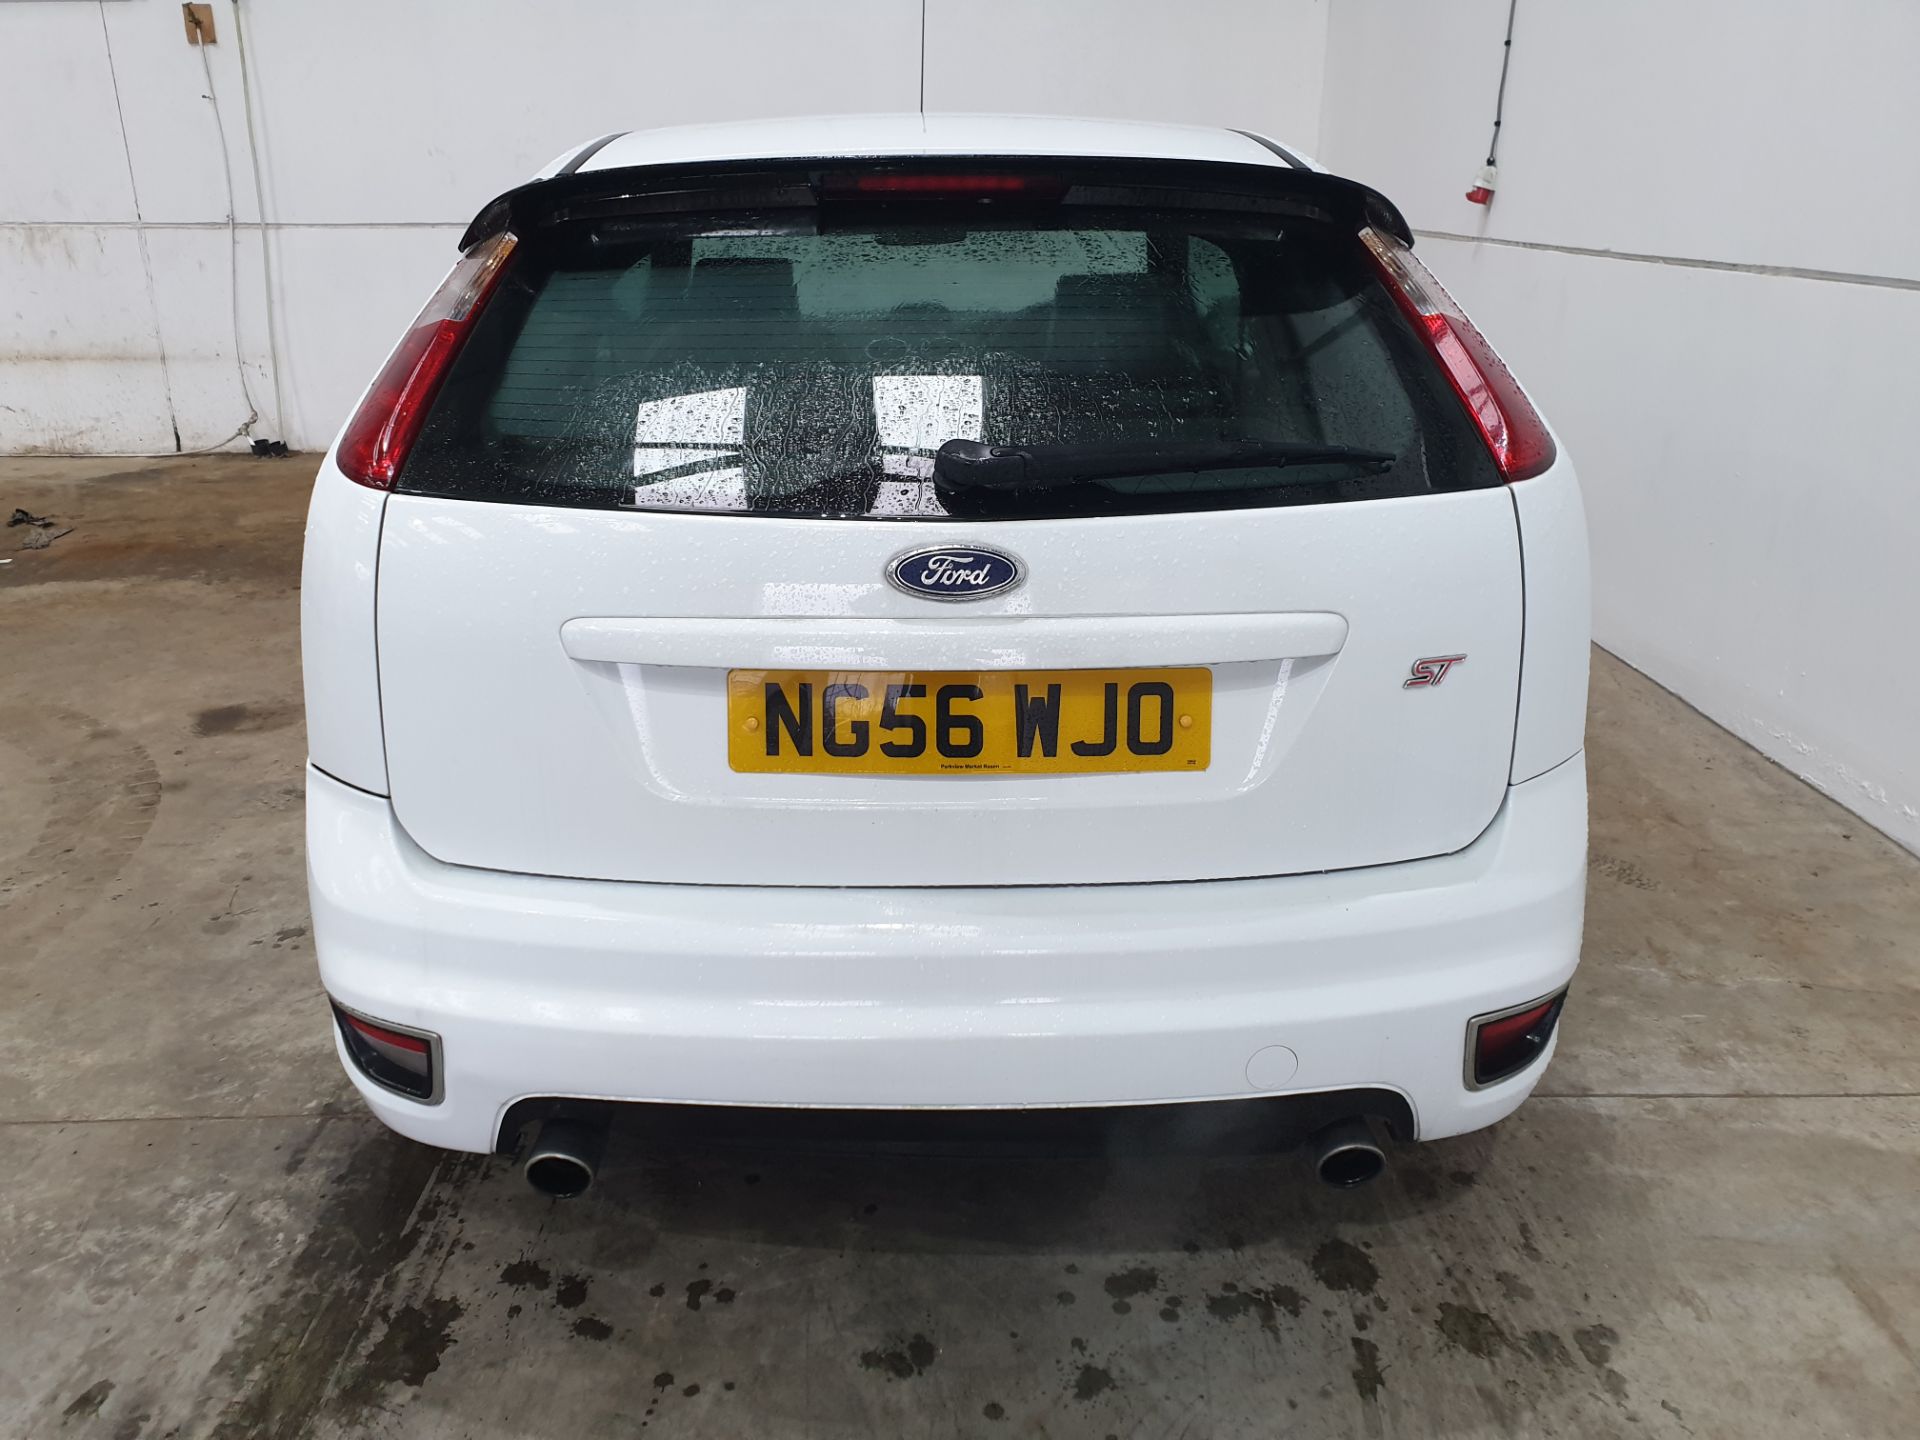 Ford Focus ST-3 - Image 4 of 13